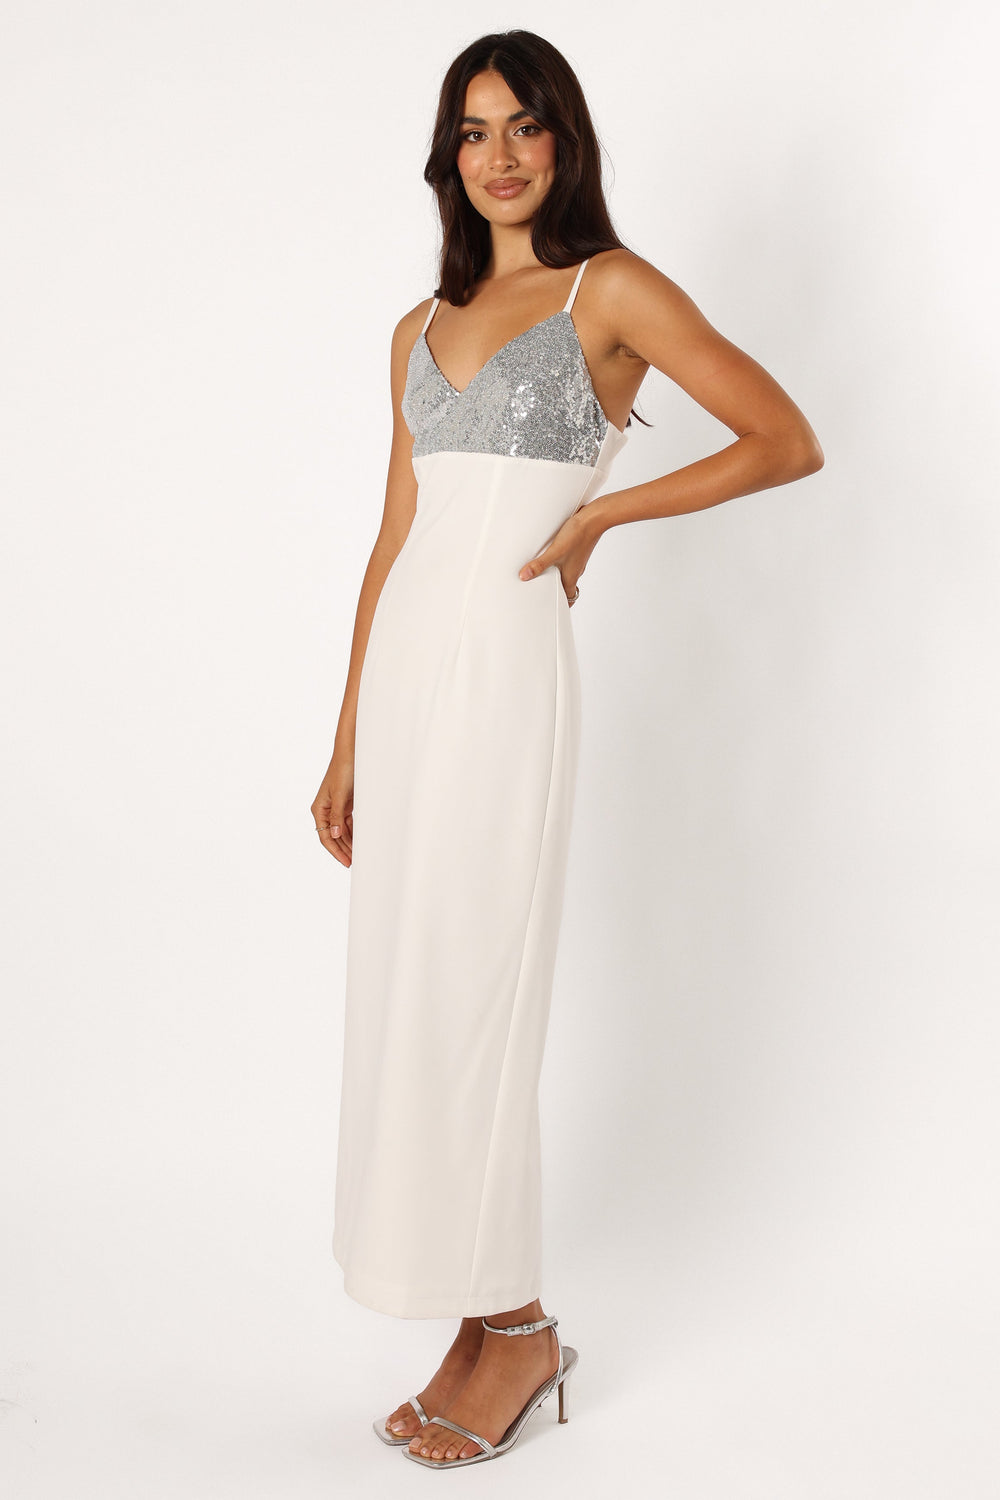 Petal and Pup USA DRESSES Kylie Slip Dress - White Silver